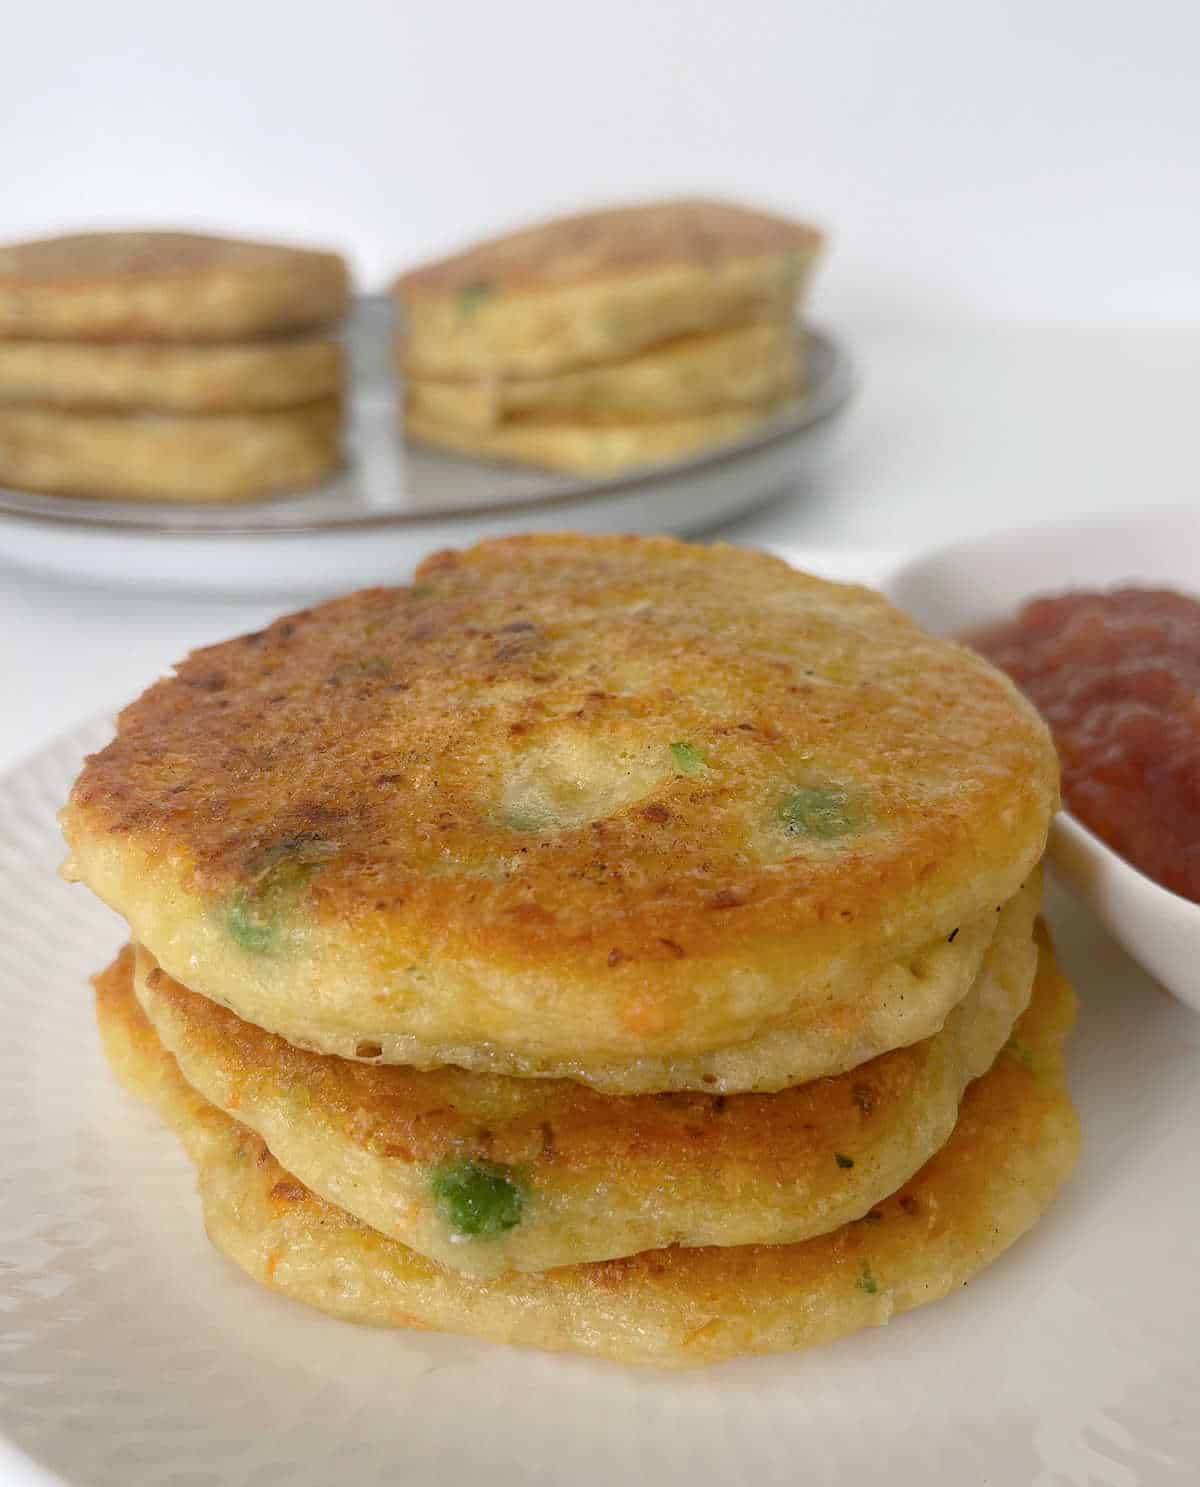 Three vegetable fritters on a white plate. A dish of tomato relish is next to them and a plate with more fritters is in the background.